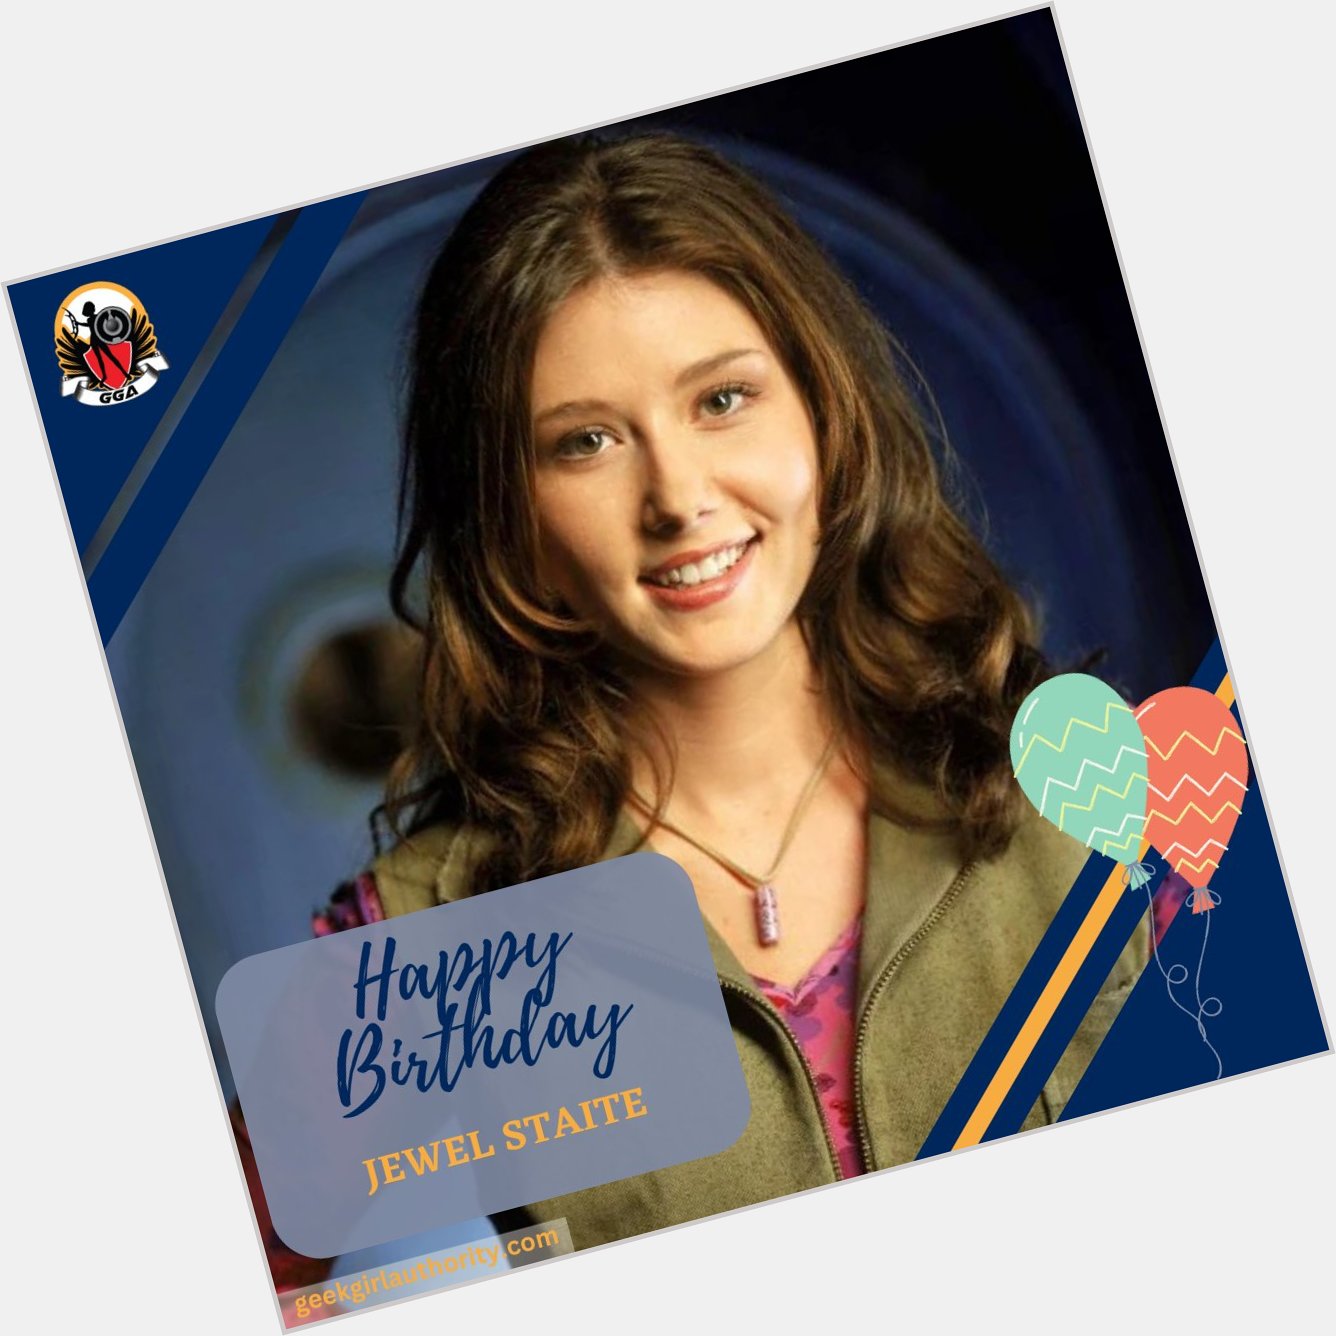 Happy Birthday, Jewel Staite!  Which one of her roles is your favorite?   